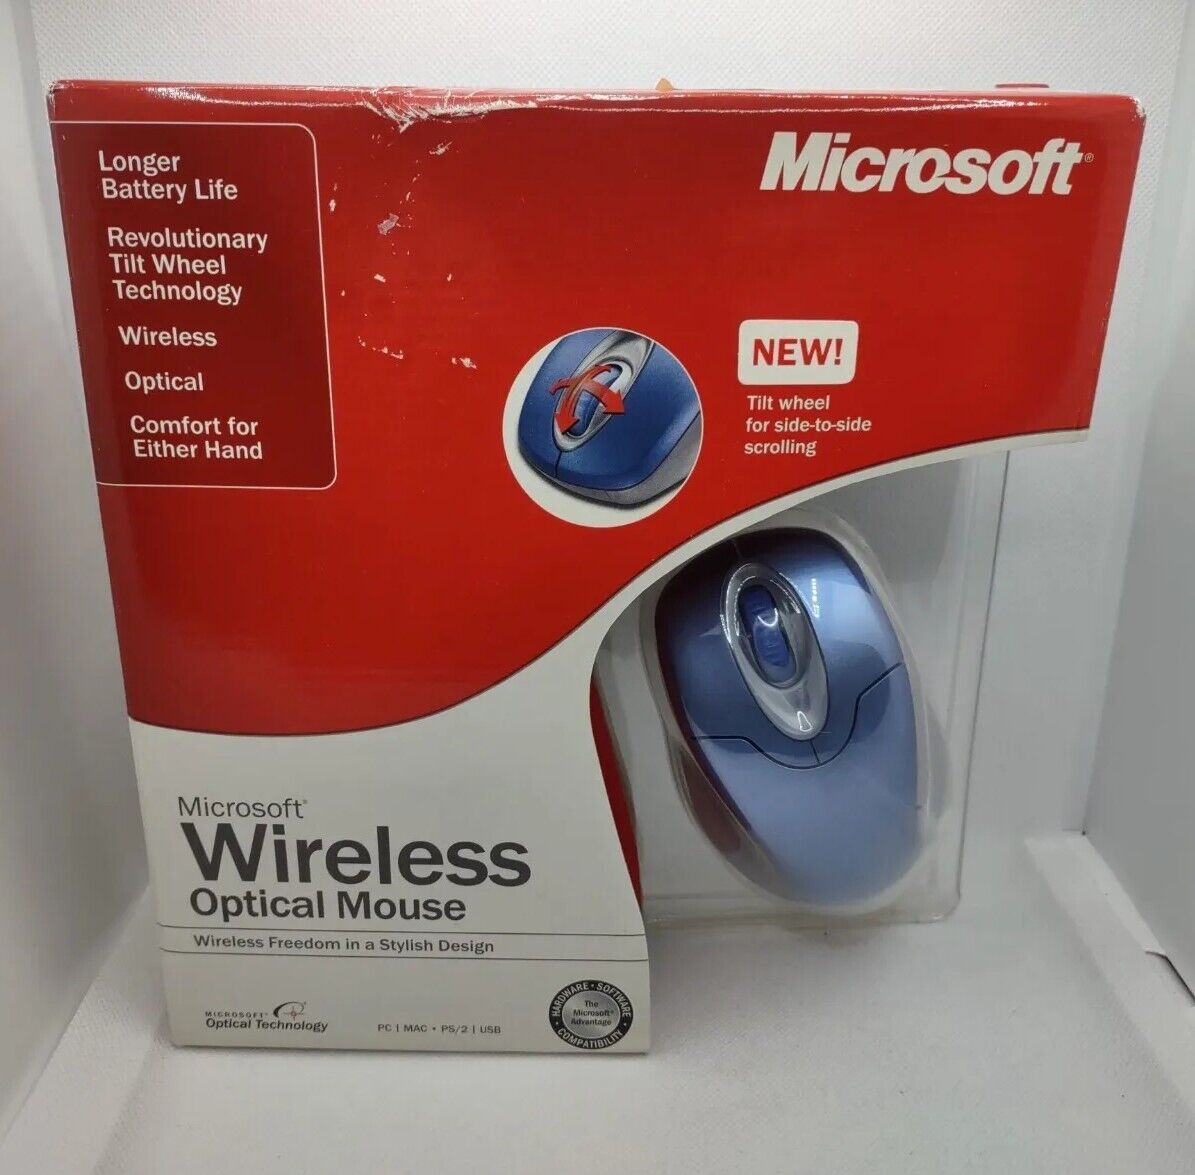 Microsoft Wireless Optical Mouse 2.0 Model 1008 Silver & Blue W/ Receiver 1